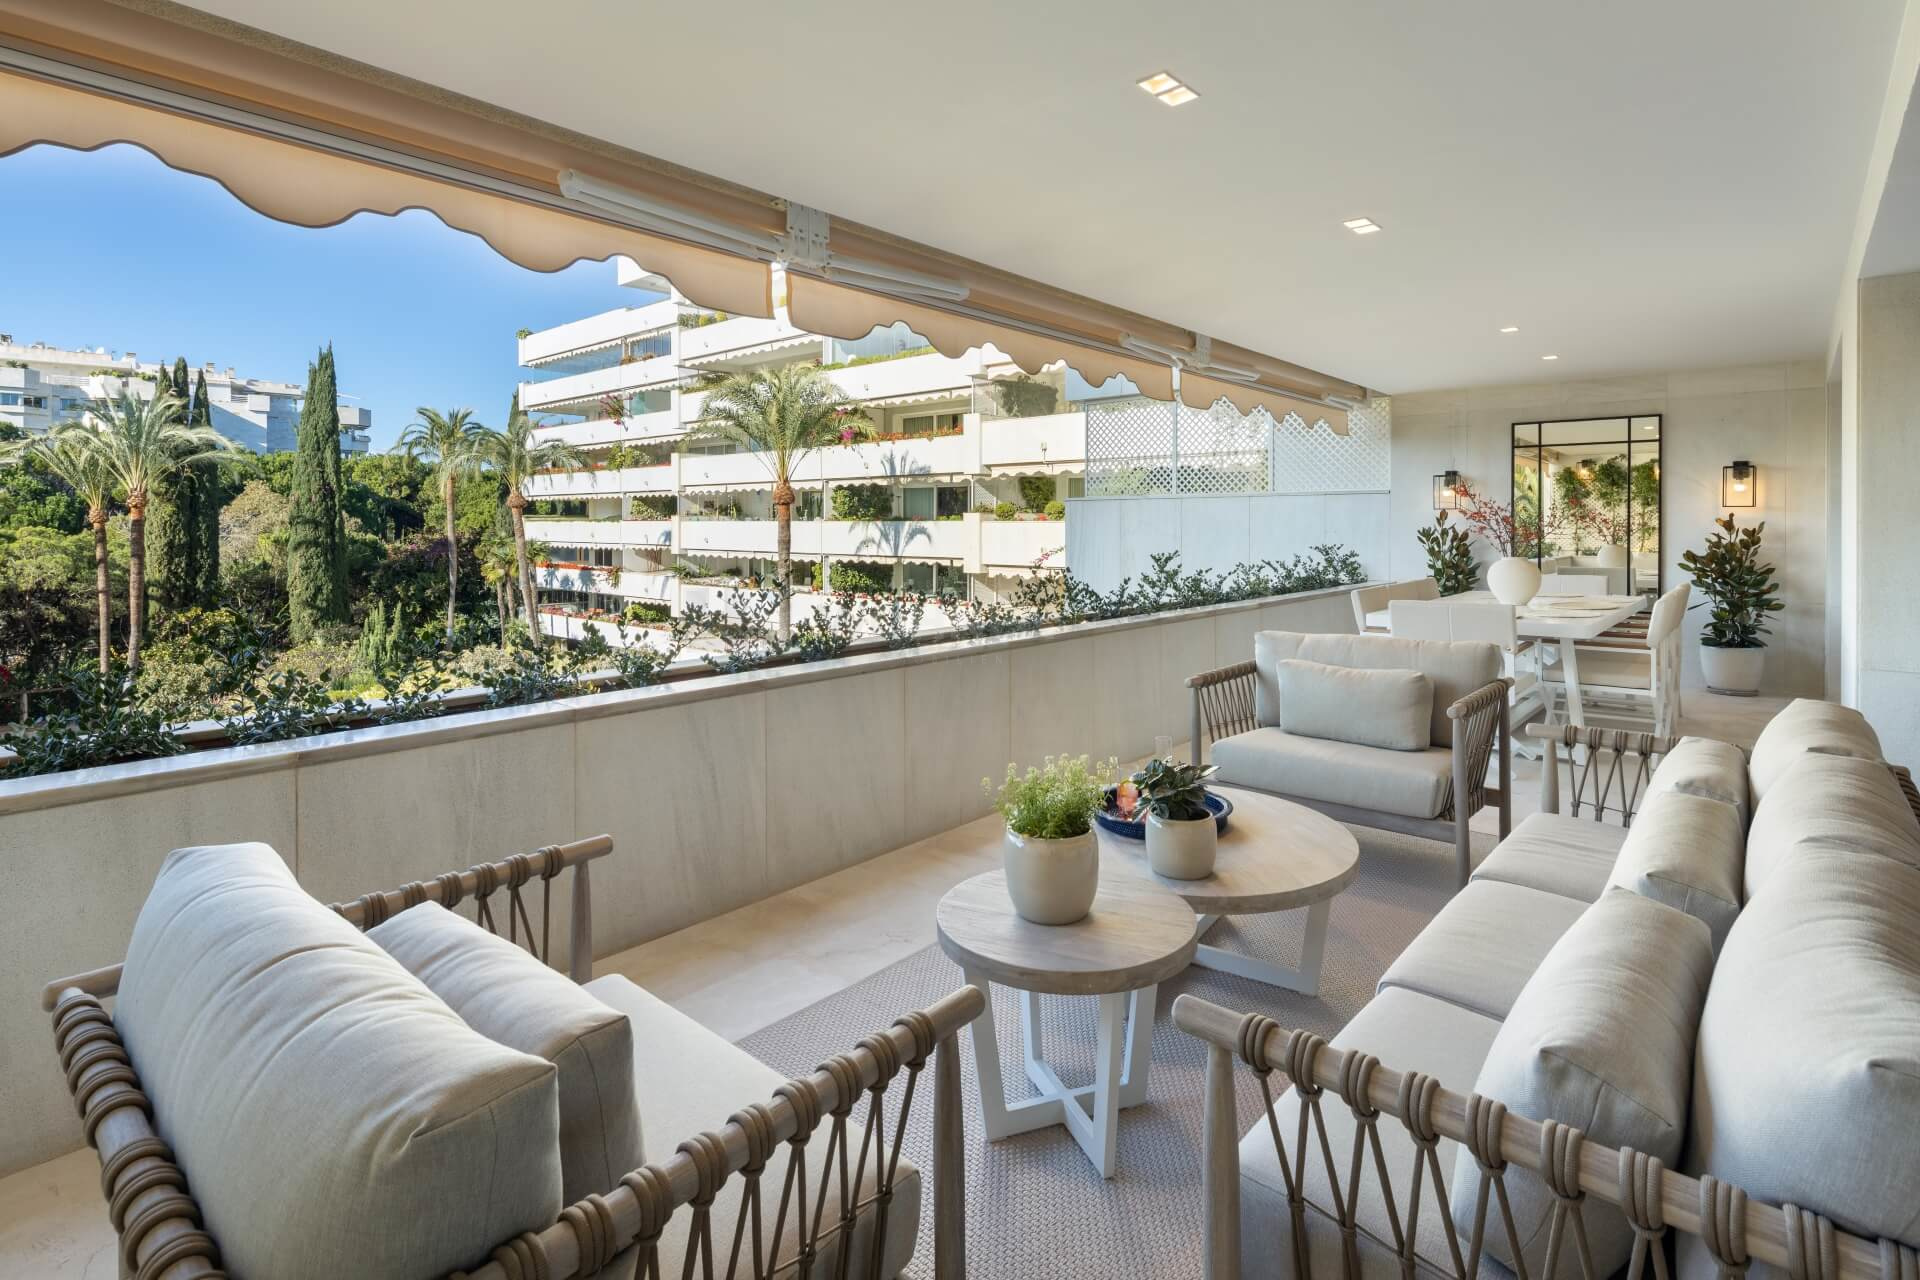 Luxury apartment nestled in the heart of Marbella